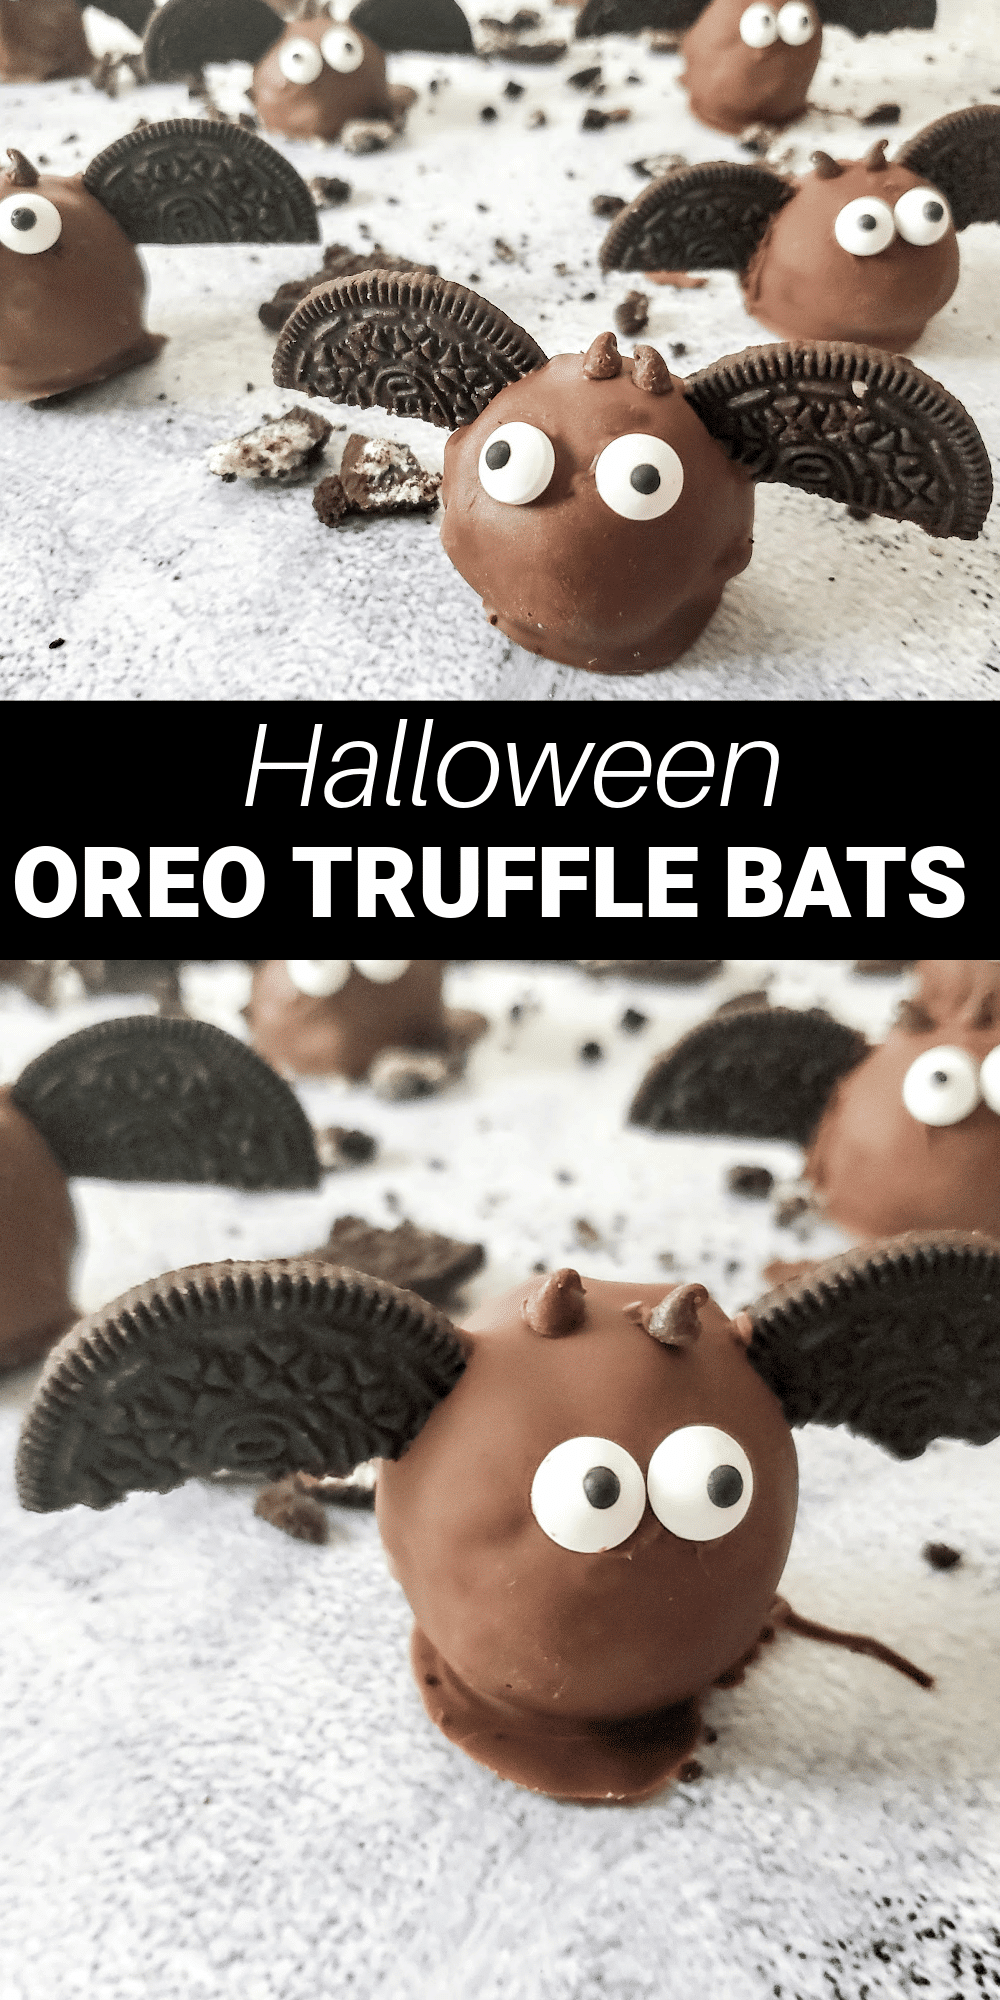 Adorable chocolate bats are a fun and creative Halloween treat your kids will love. Made with an Oreo cookie and cream cheese base, they are soft and delicious on the inside. 